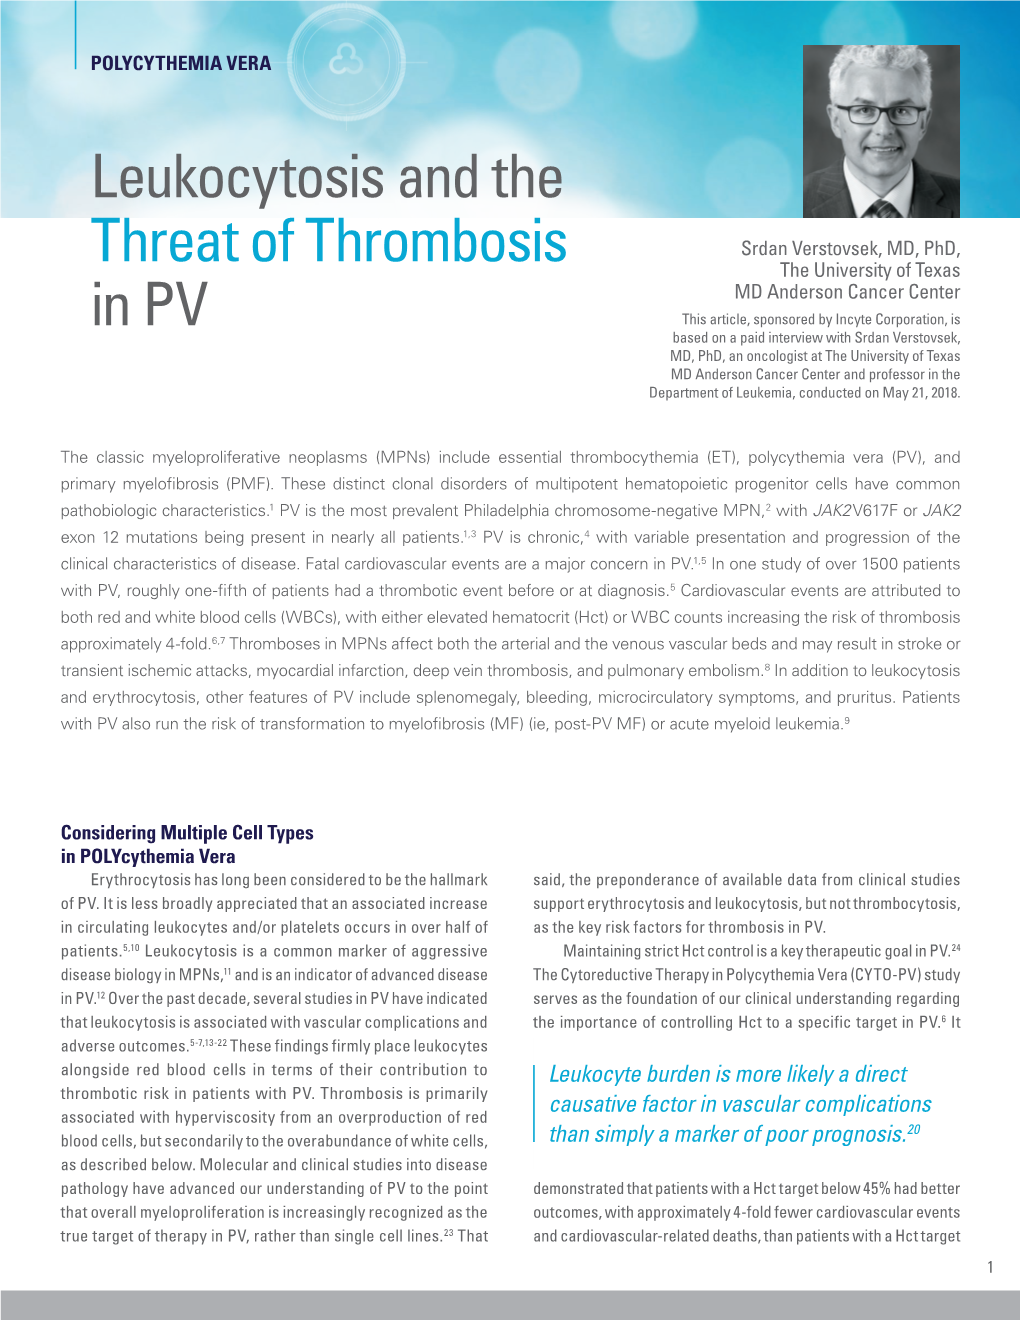 Leukocytosis and the Threat of Thrombosis in PV